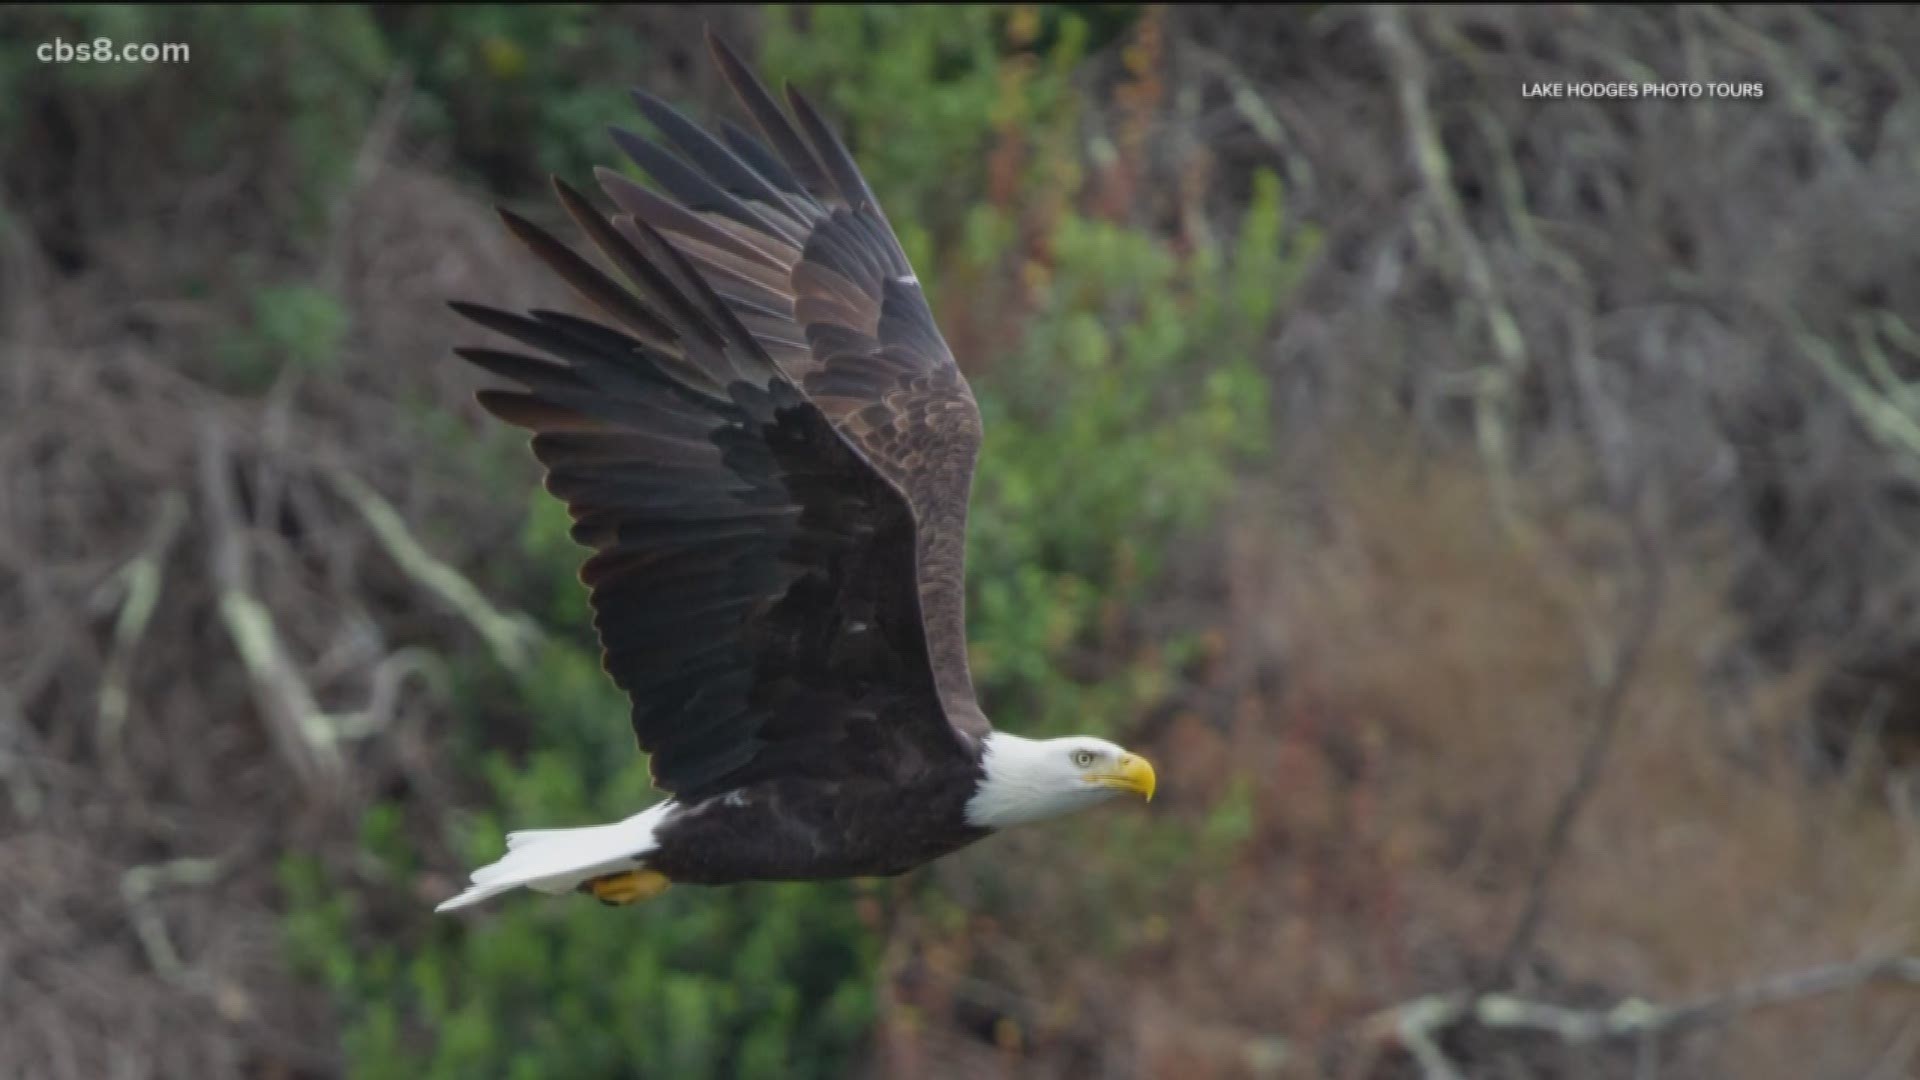 Bald eagle sightings are on the rise across San Diego, and one wildlife photographer said he has been seeing more and more of the majestic birds at Lake Hodges.